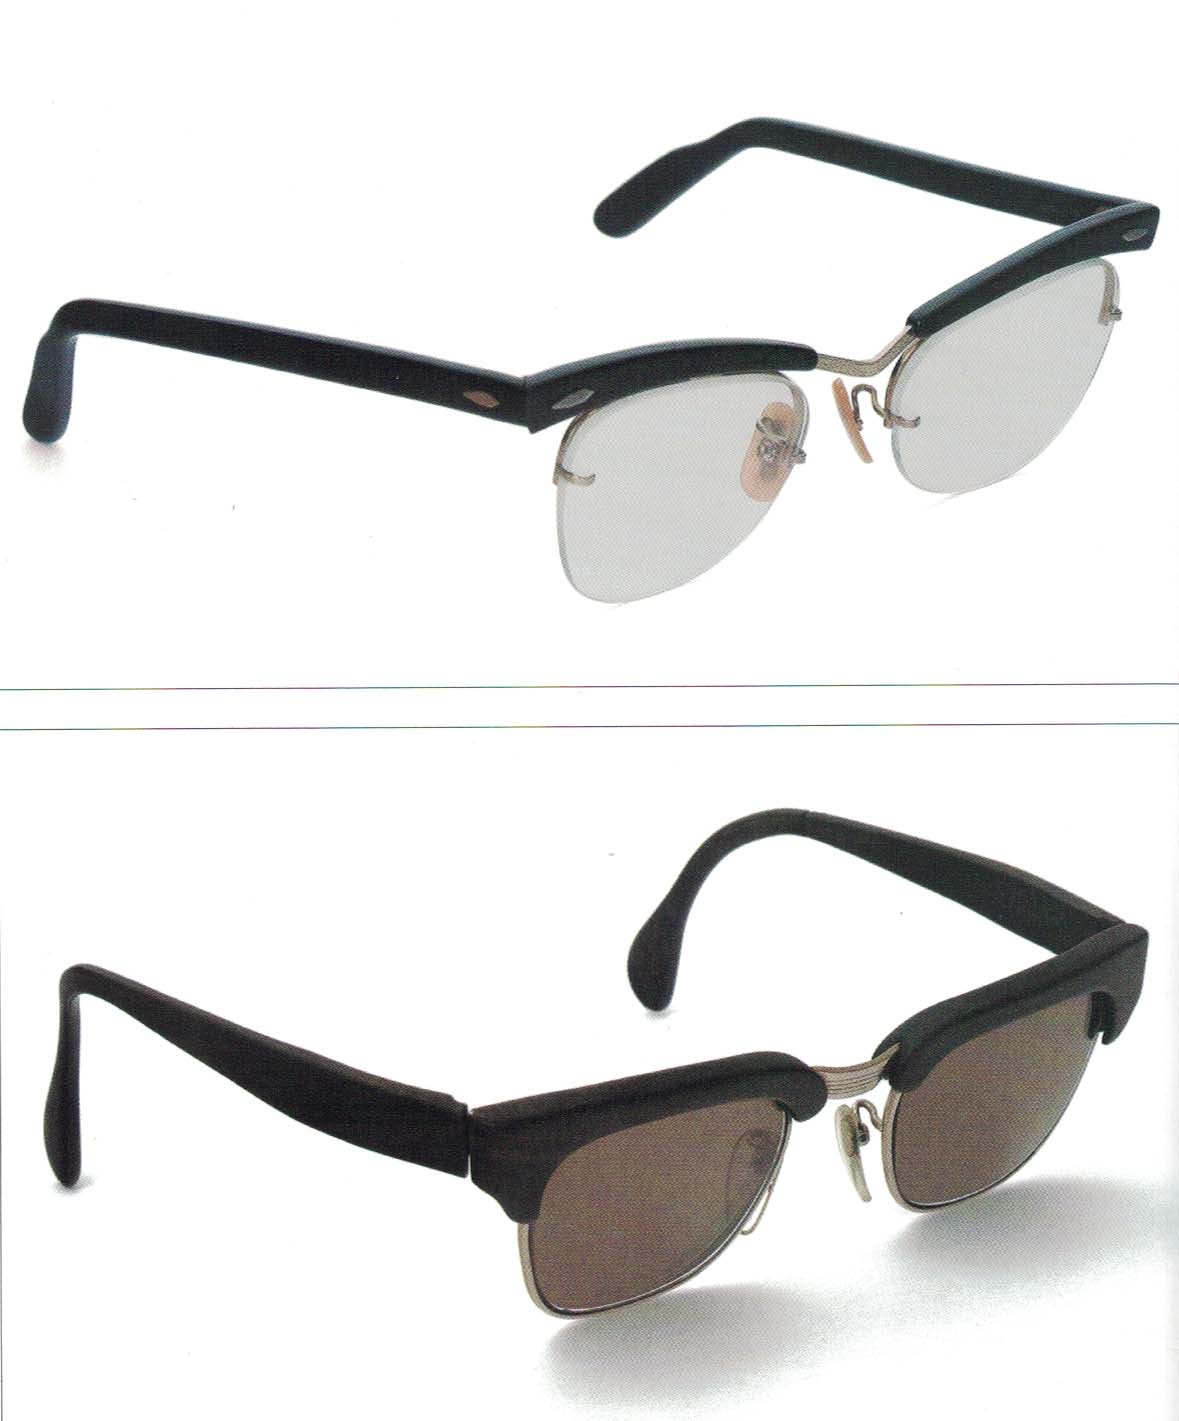 Eyeglasses from 1950, from Spectacles and Sunglasses